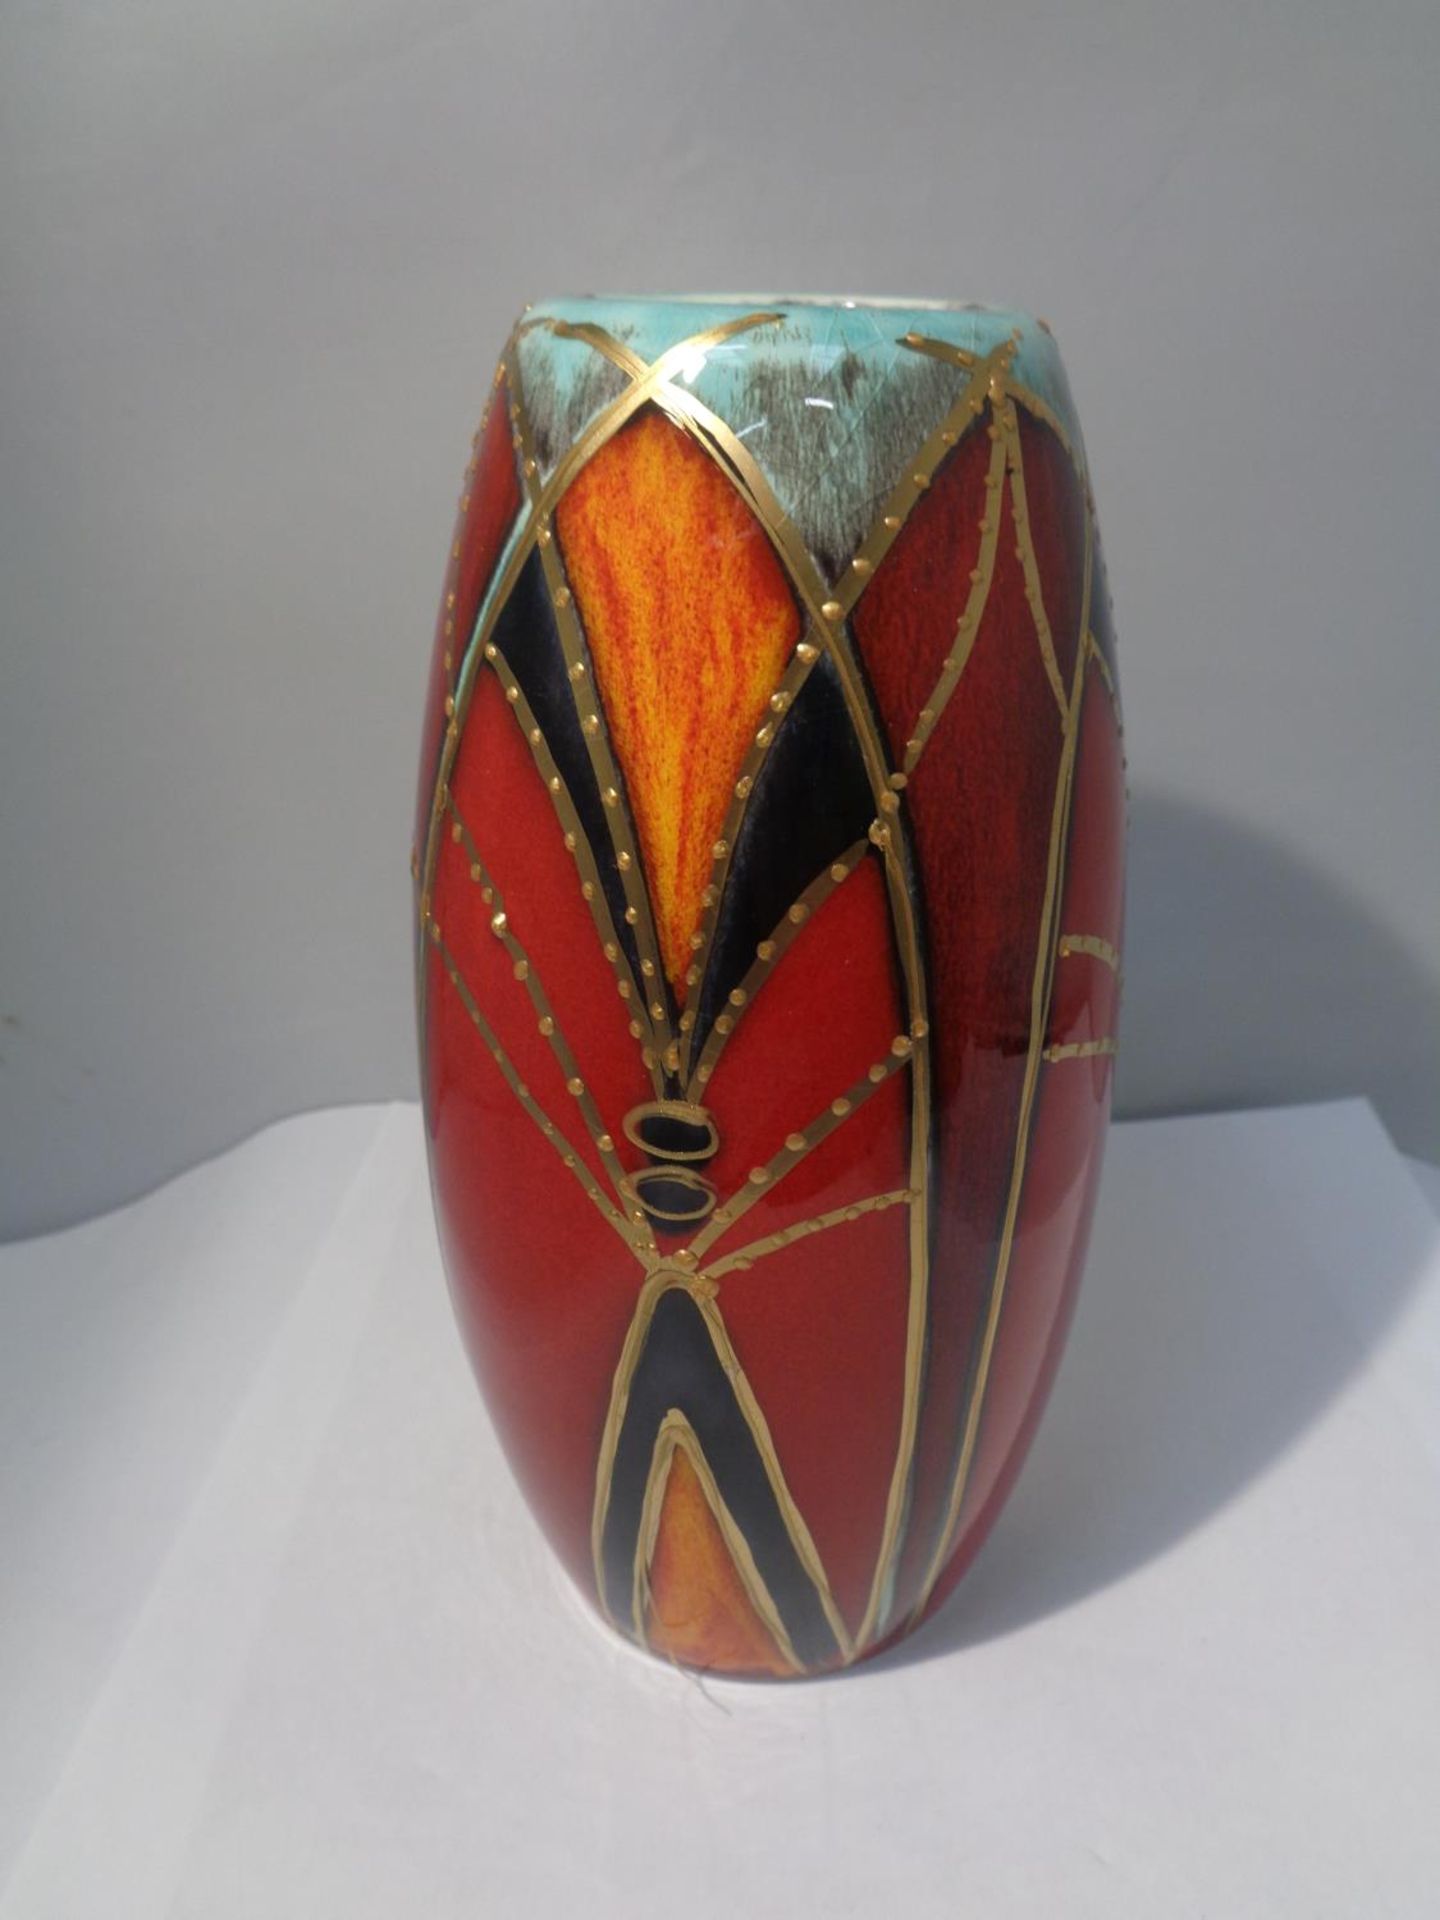 AN ANITA HARRIS HAND PAINTED GOTHIC ARCHES VASE SIGNED IN GOLD - Image 2 of 4